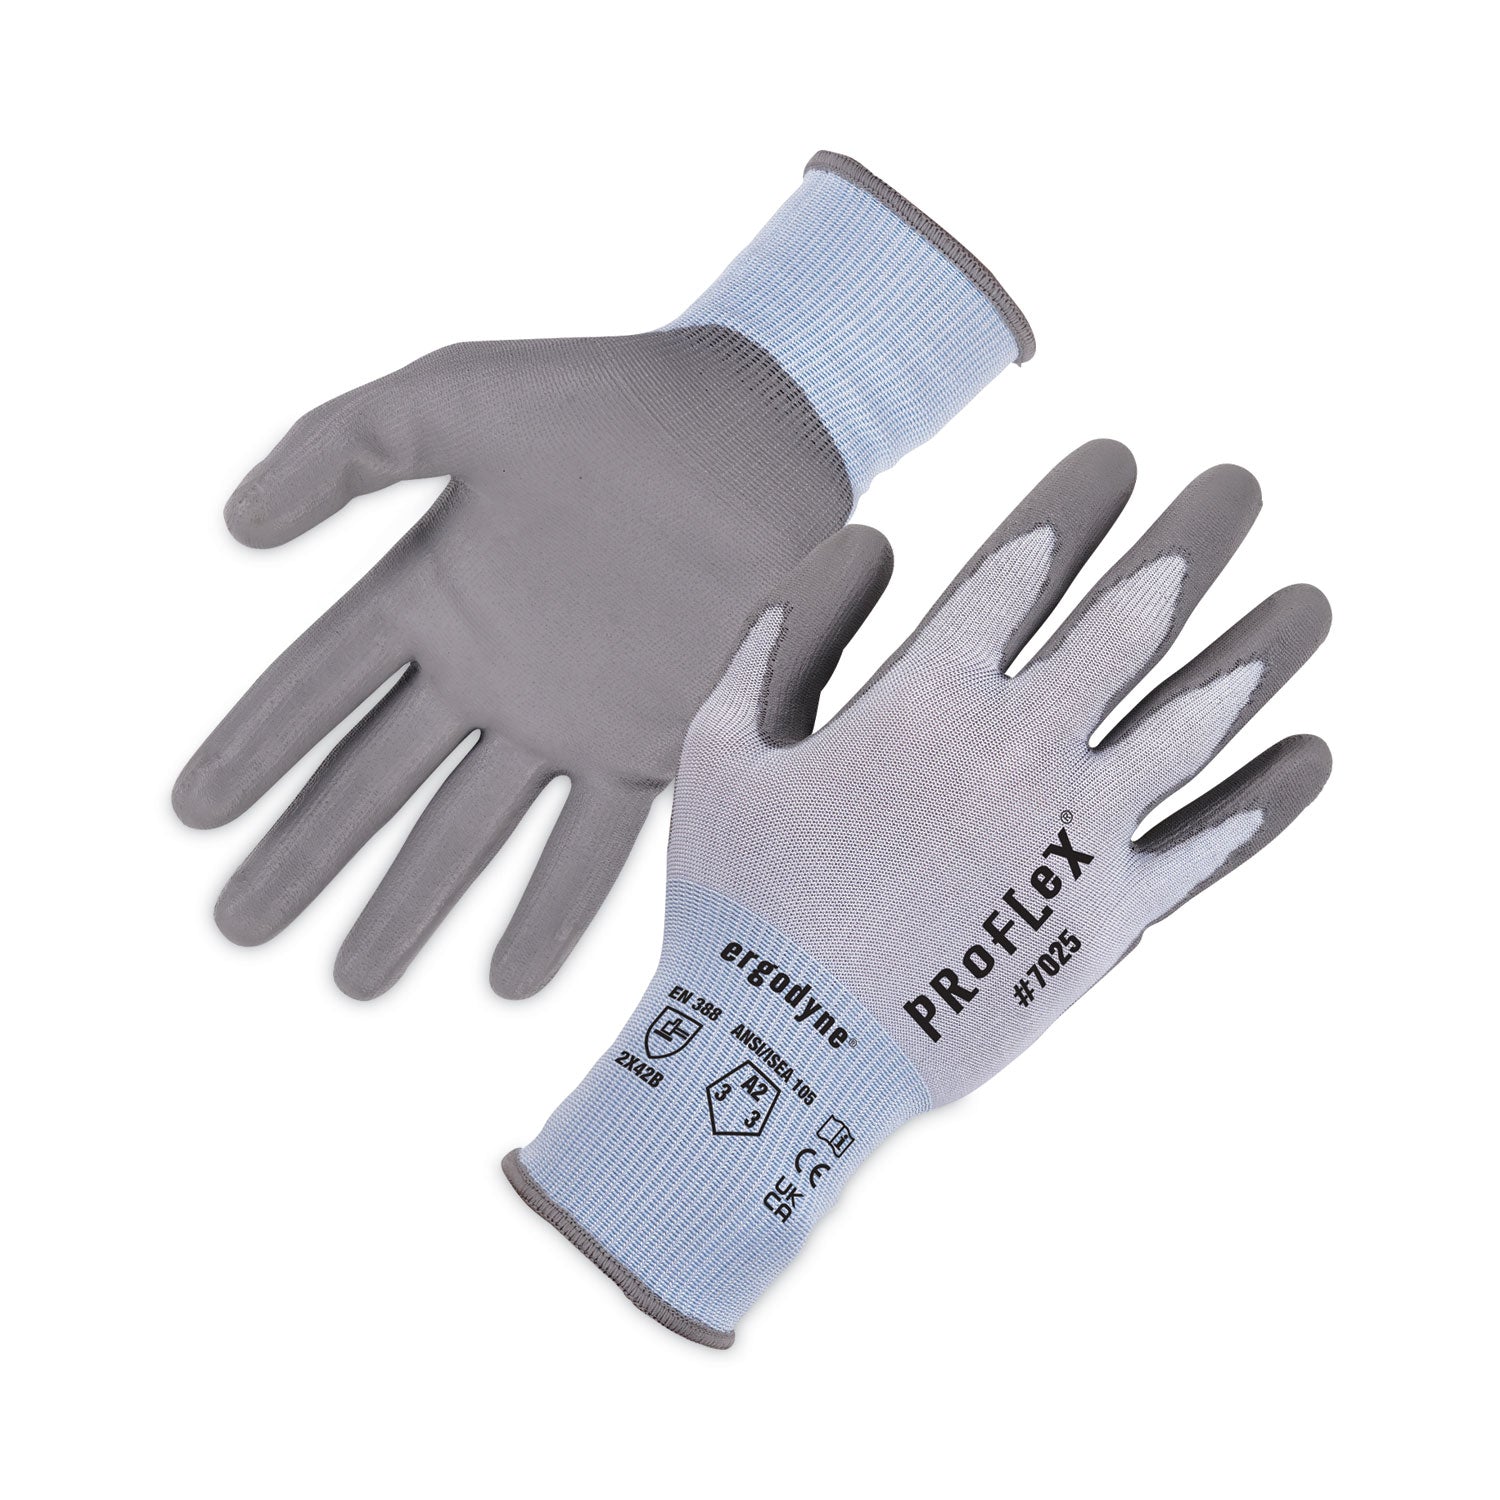 proflex-7025-ansi-a2-pu-coated-cr-gloves-blue-small-pair-ships-in-1-3-business-days_ego10432 - 1